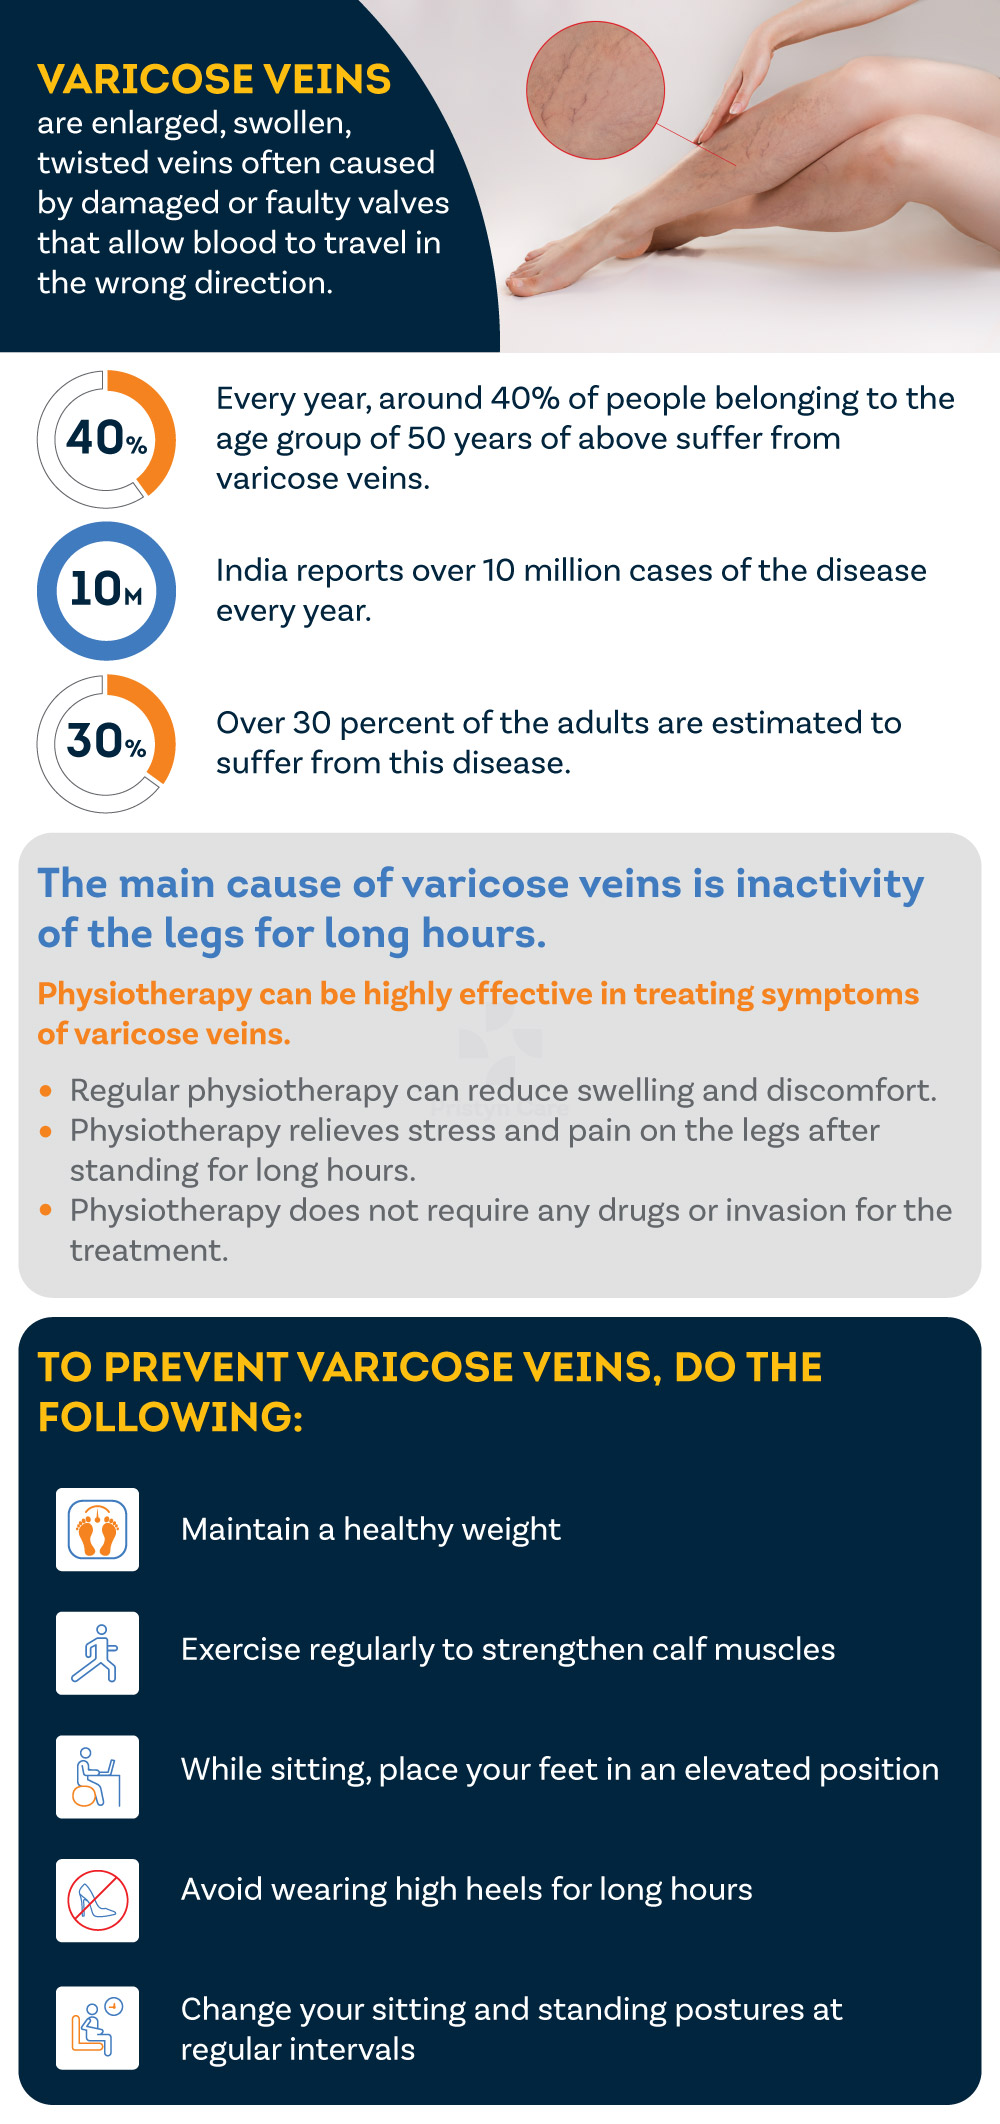 5 common and effective physiotherapy methods that can treat varicose veins in legs